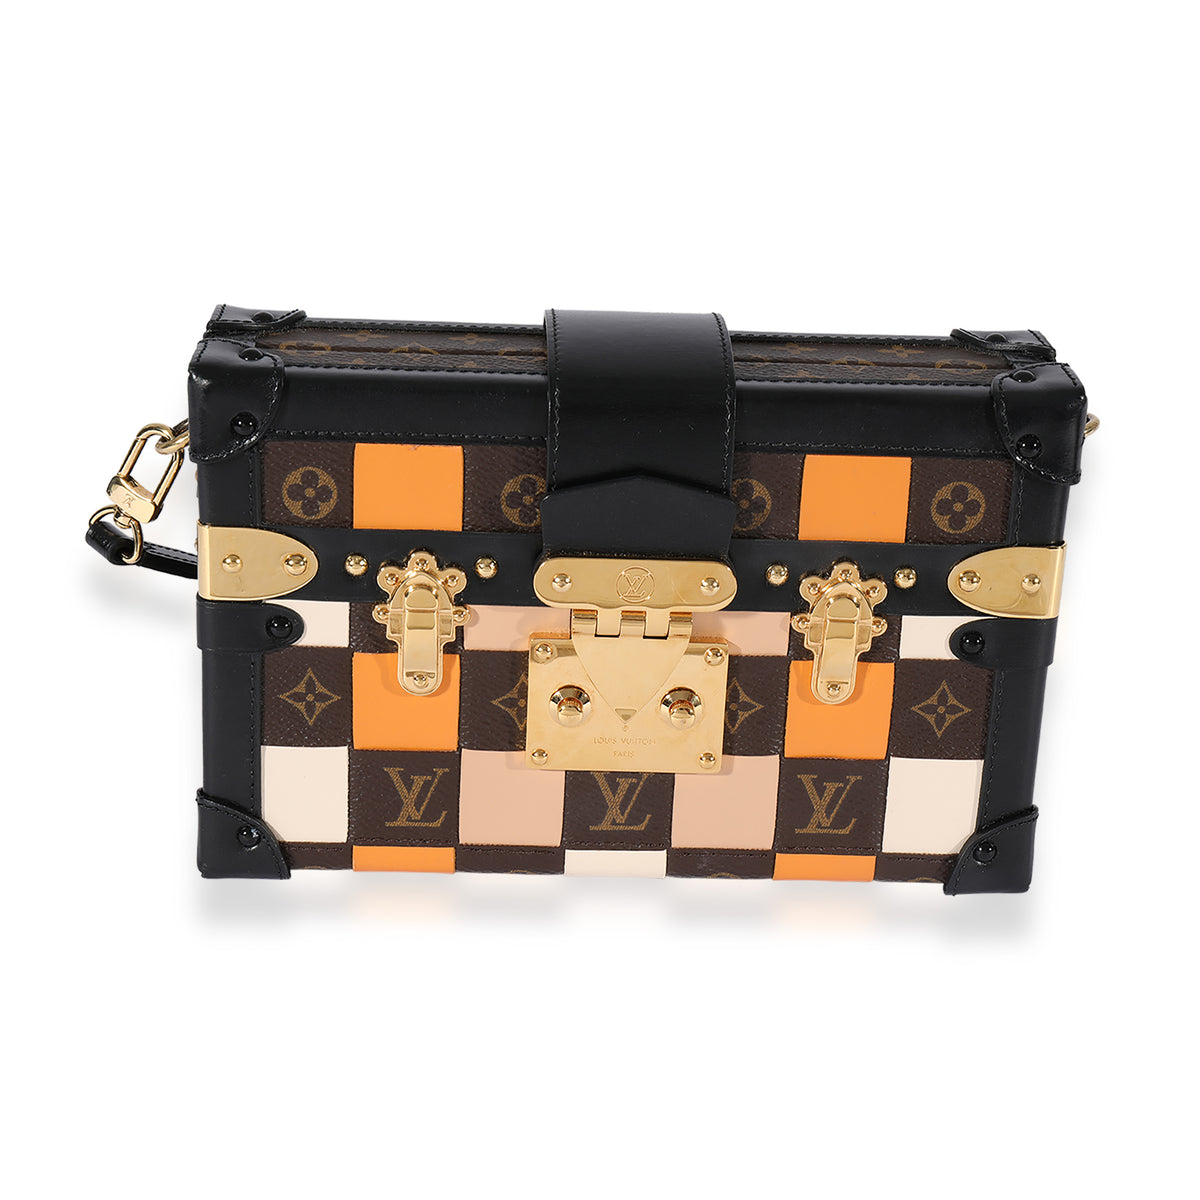 Pre-Owned LV Petite Malle Bag 212998/1